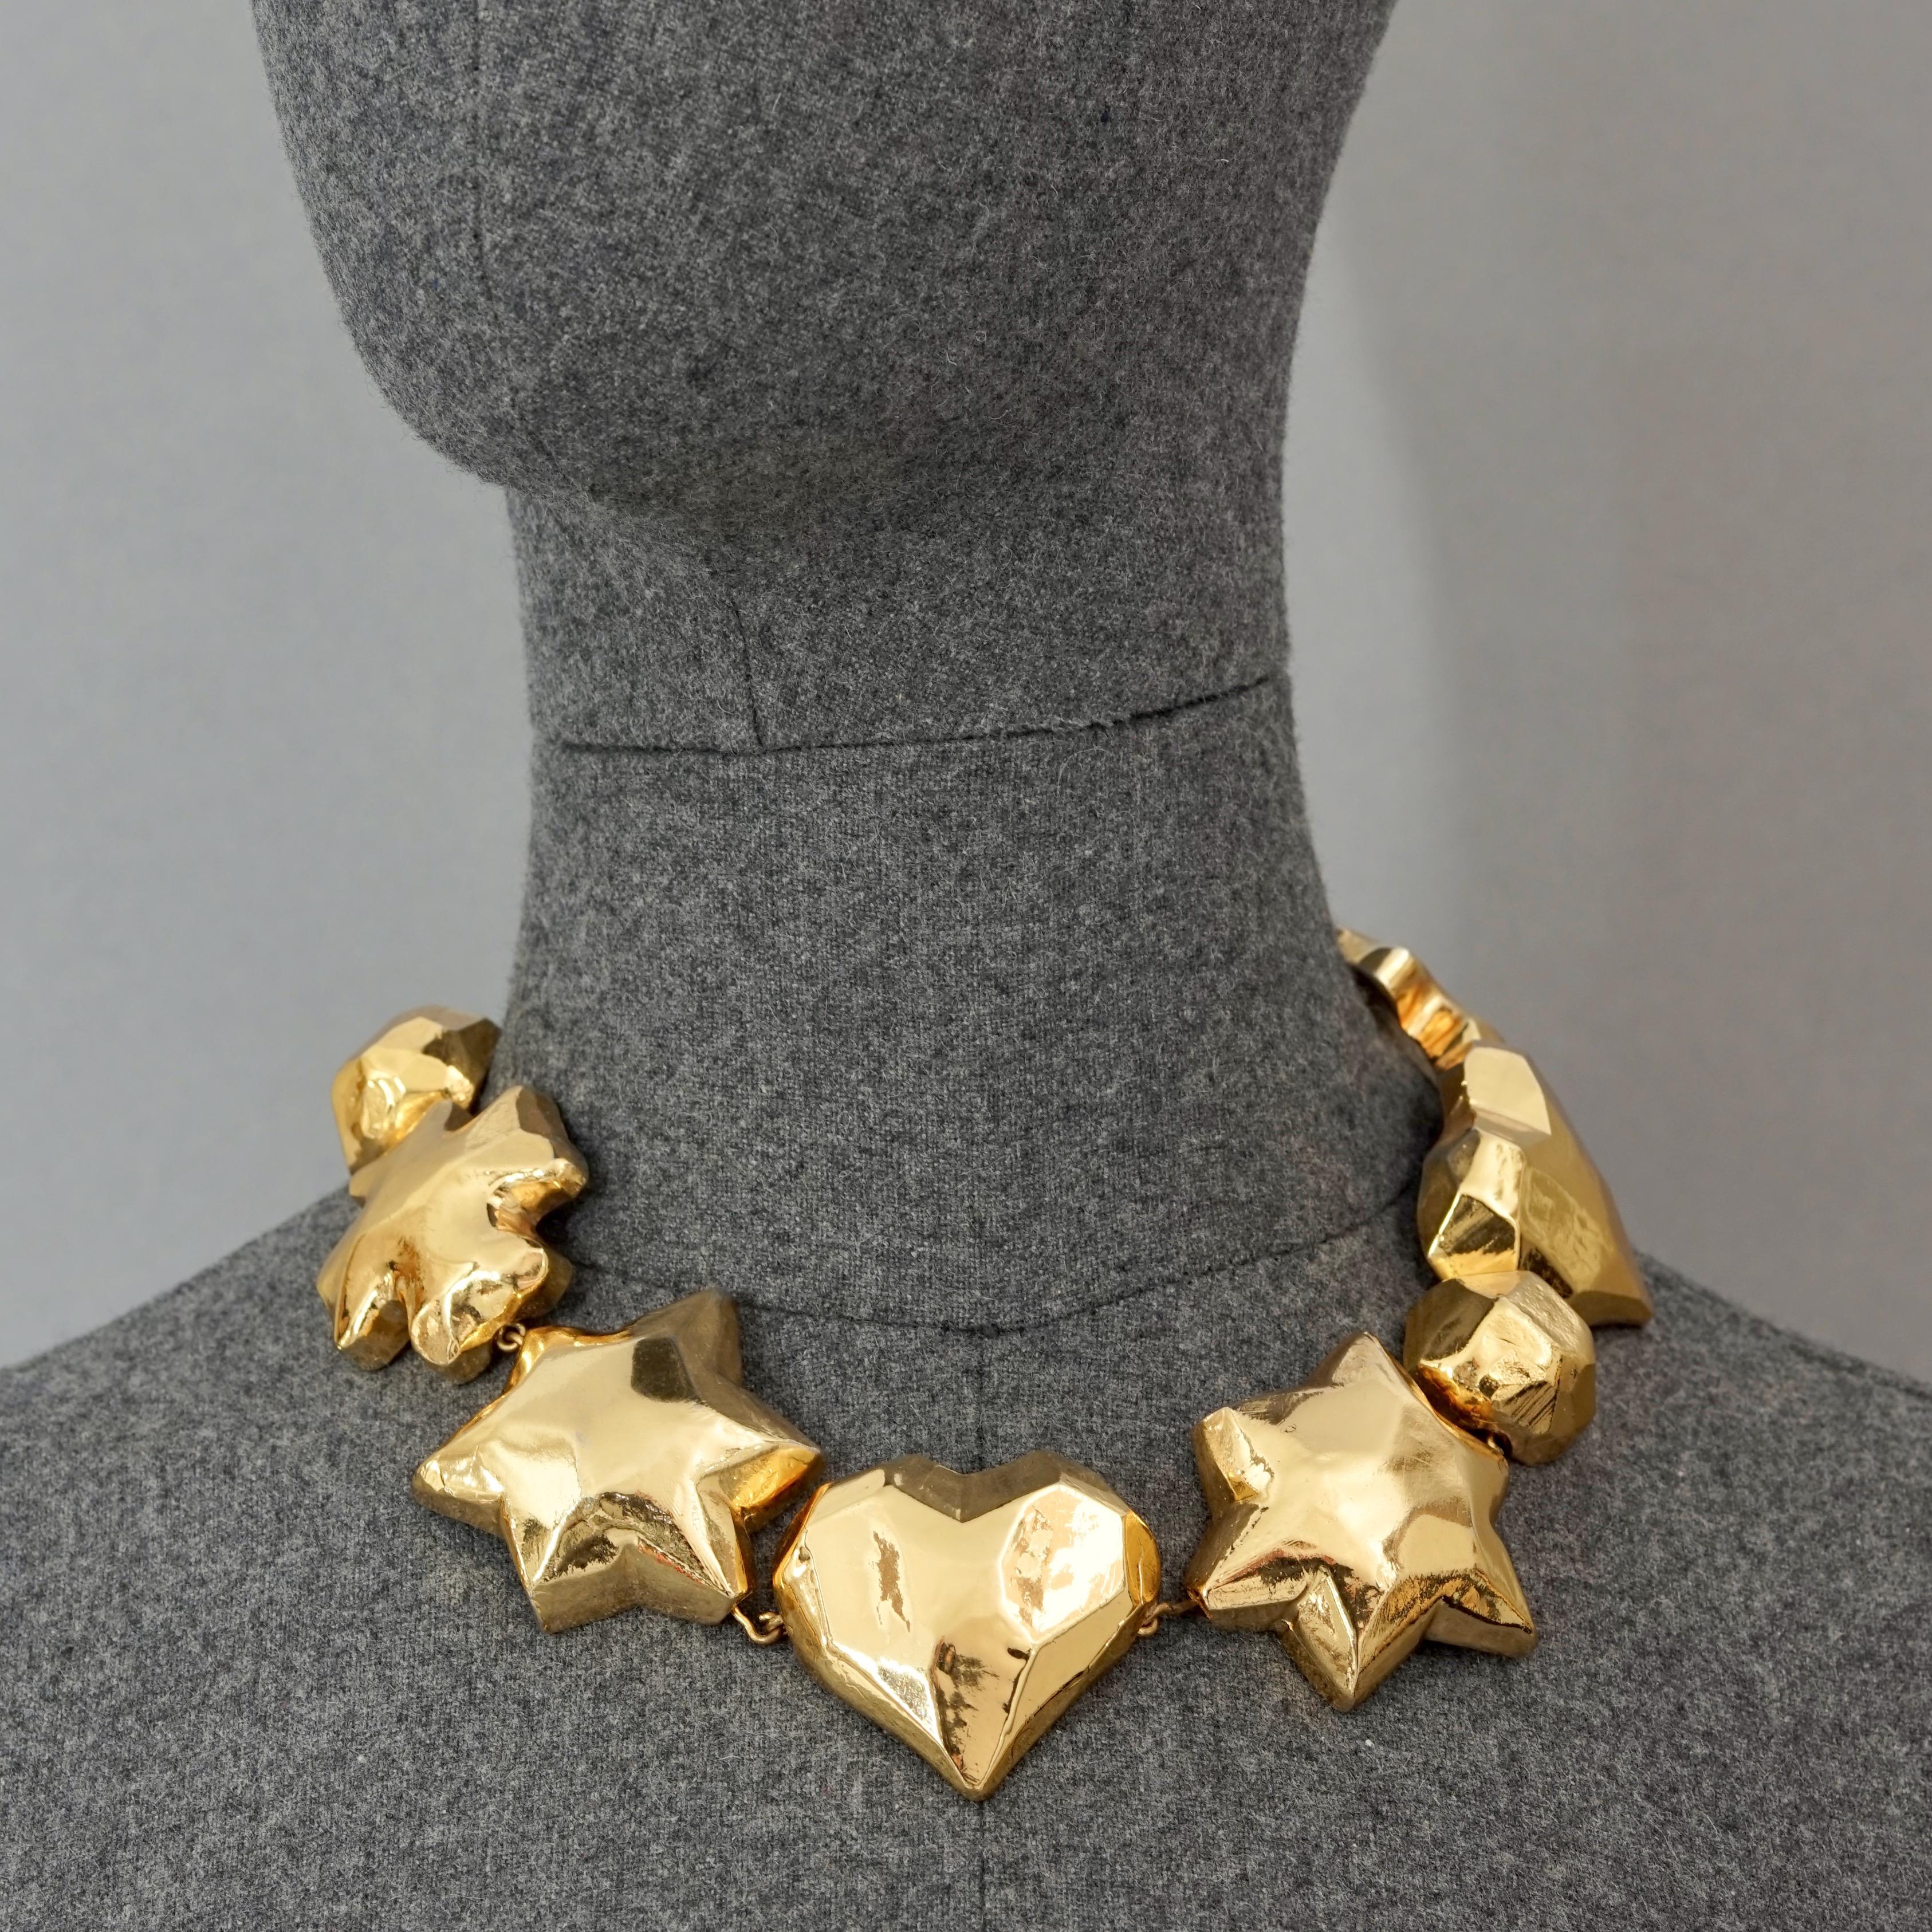 Vintage Iconic CHRISTIAN LACROIX Cross Star Heart Choker Necklace

Measurements:
Height: 1.73 inches (4.4 cm)
Wearable Length: 16.14 inches to 18.11 cm (41 cm to 46 cm) adjustable

Features:
- 100% Authentic CHRISTIAN LACROIX.
- Chunky 3D iconic